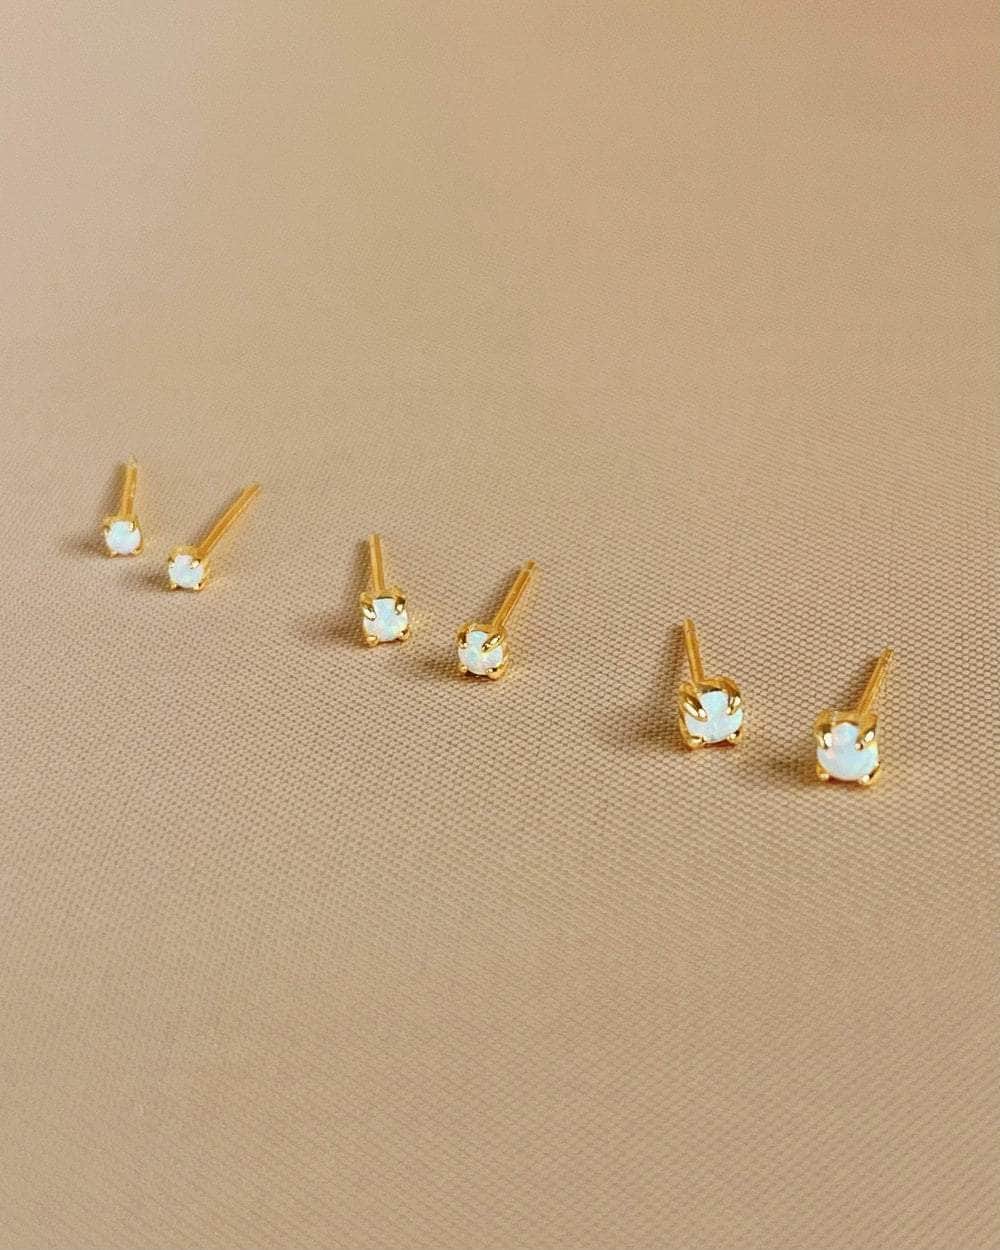 So Dainty Co. Studs Arabella Opal Studs (Choose 1 — 2mm / 2.5mm / 3mm) Gold Plated 925 Sterling Silver Jewelry